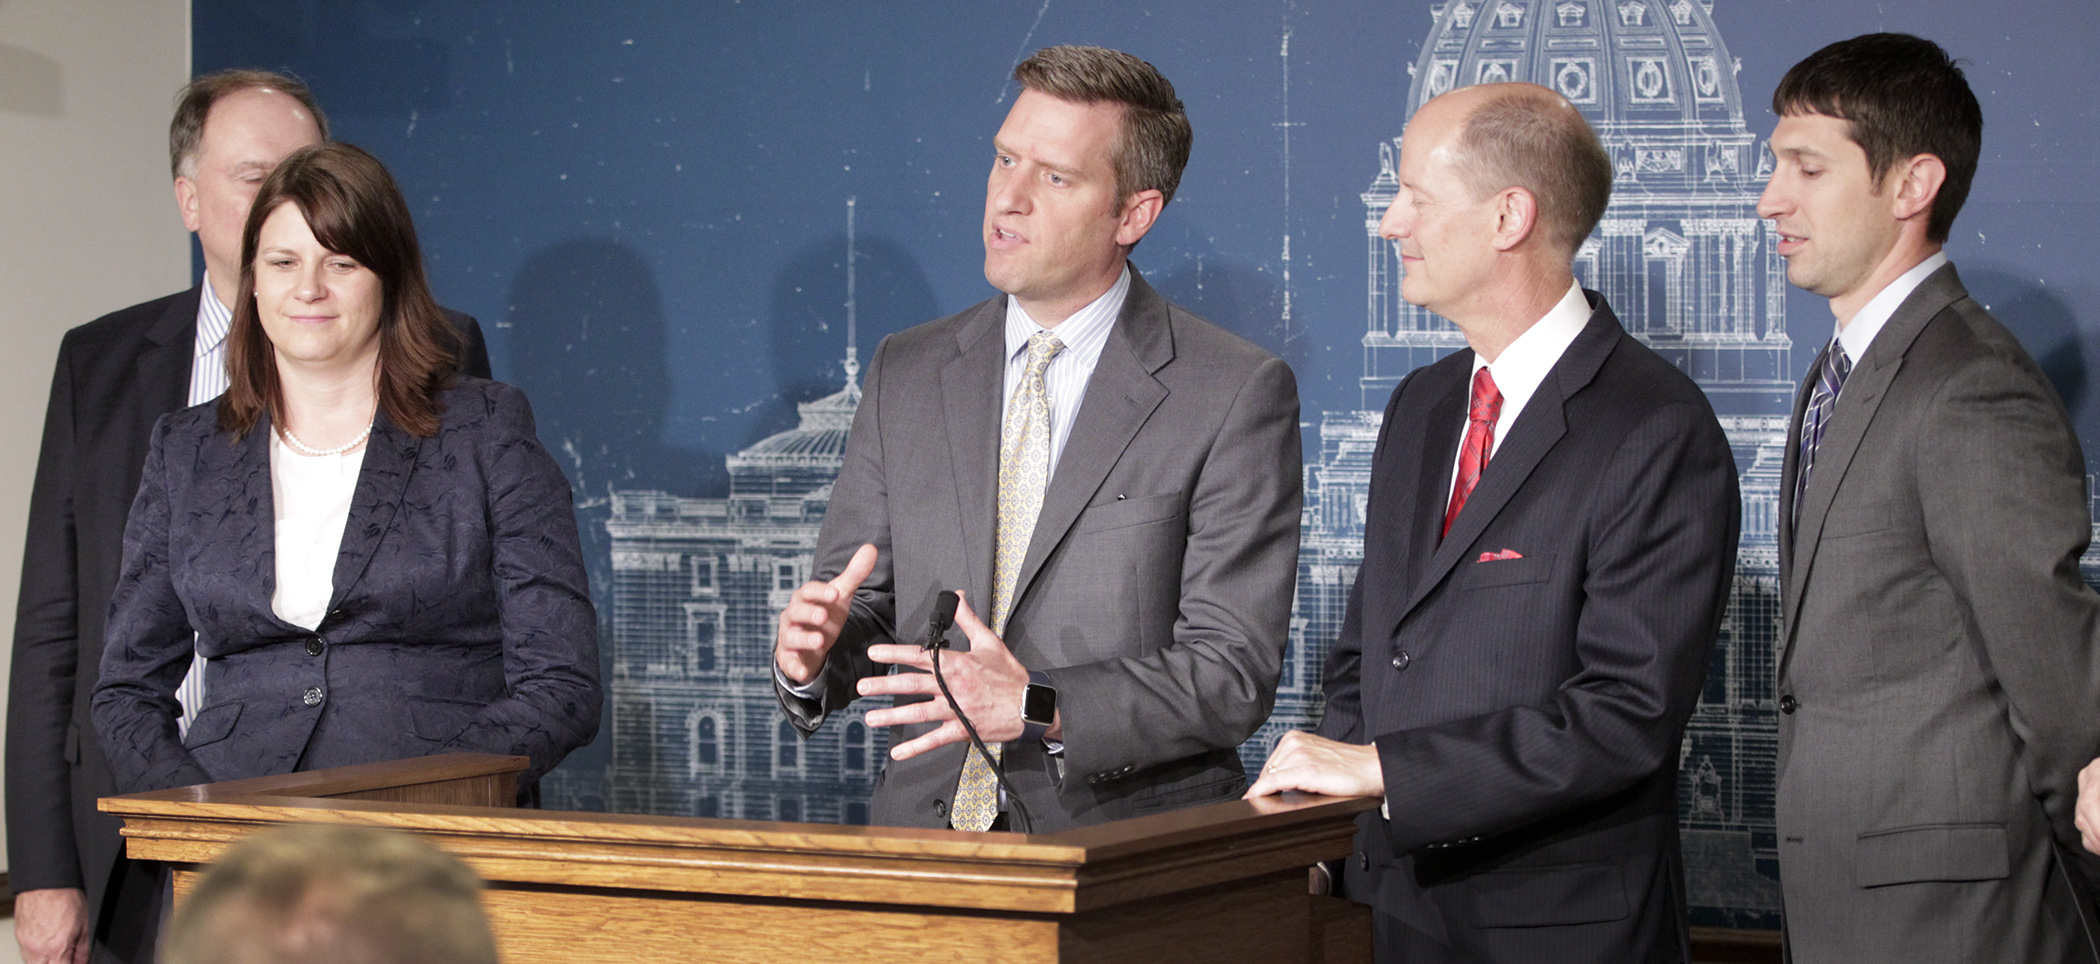 Flanked by other Republican leaders, House Speaker Kurt Daudt speaks to the media about a new series of budget bills that will be considered before the constitutional end of session Monday. Photo by Paul Battaglia